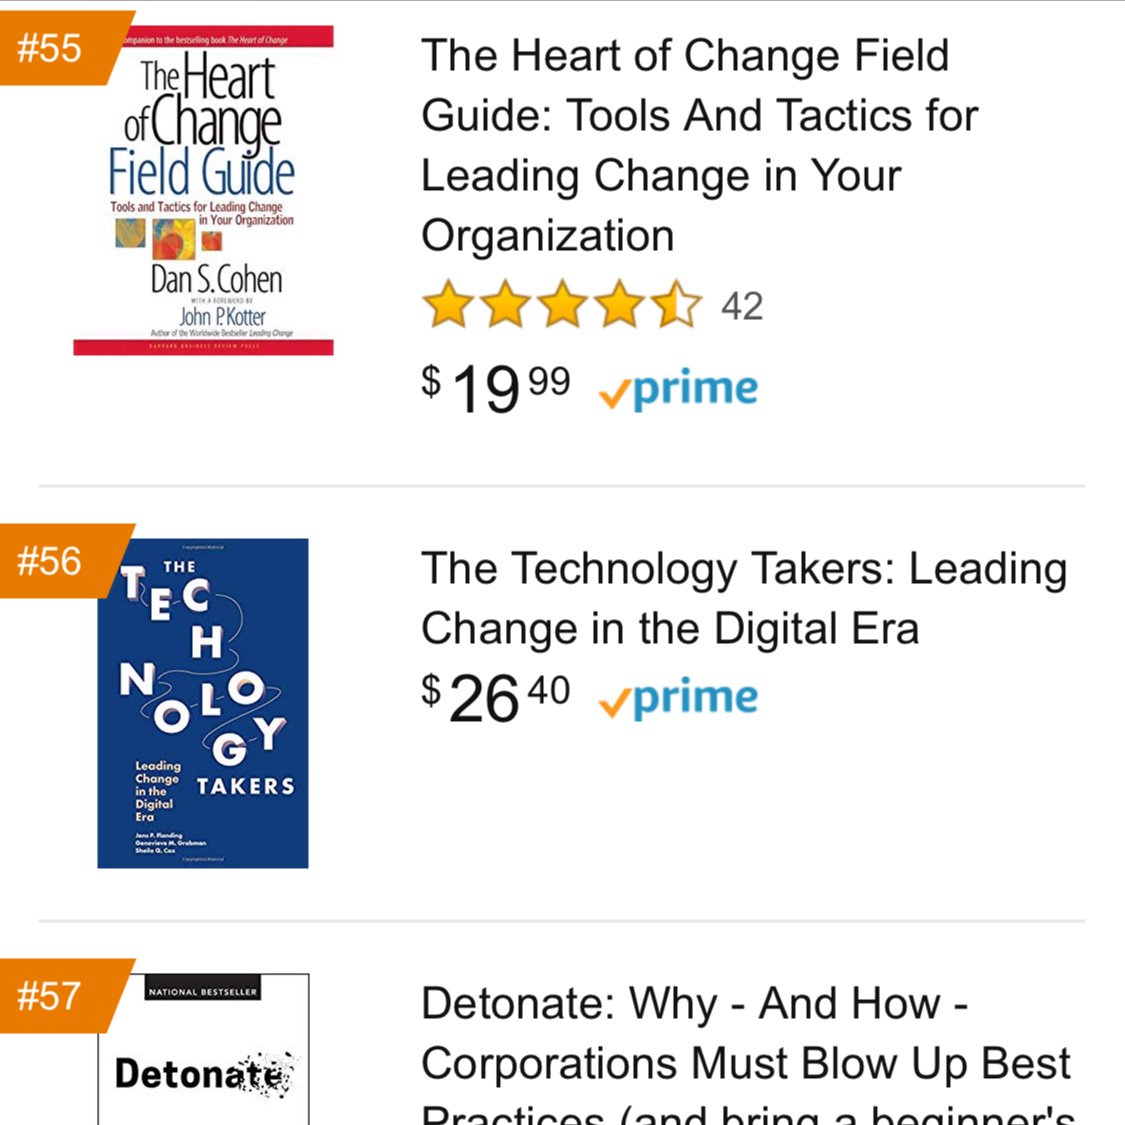 Right now at #56! Just below #theheartofchange